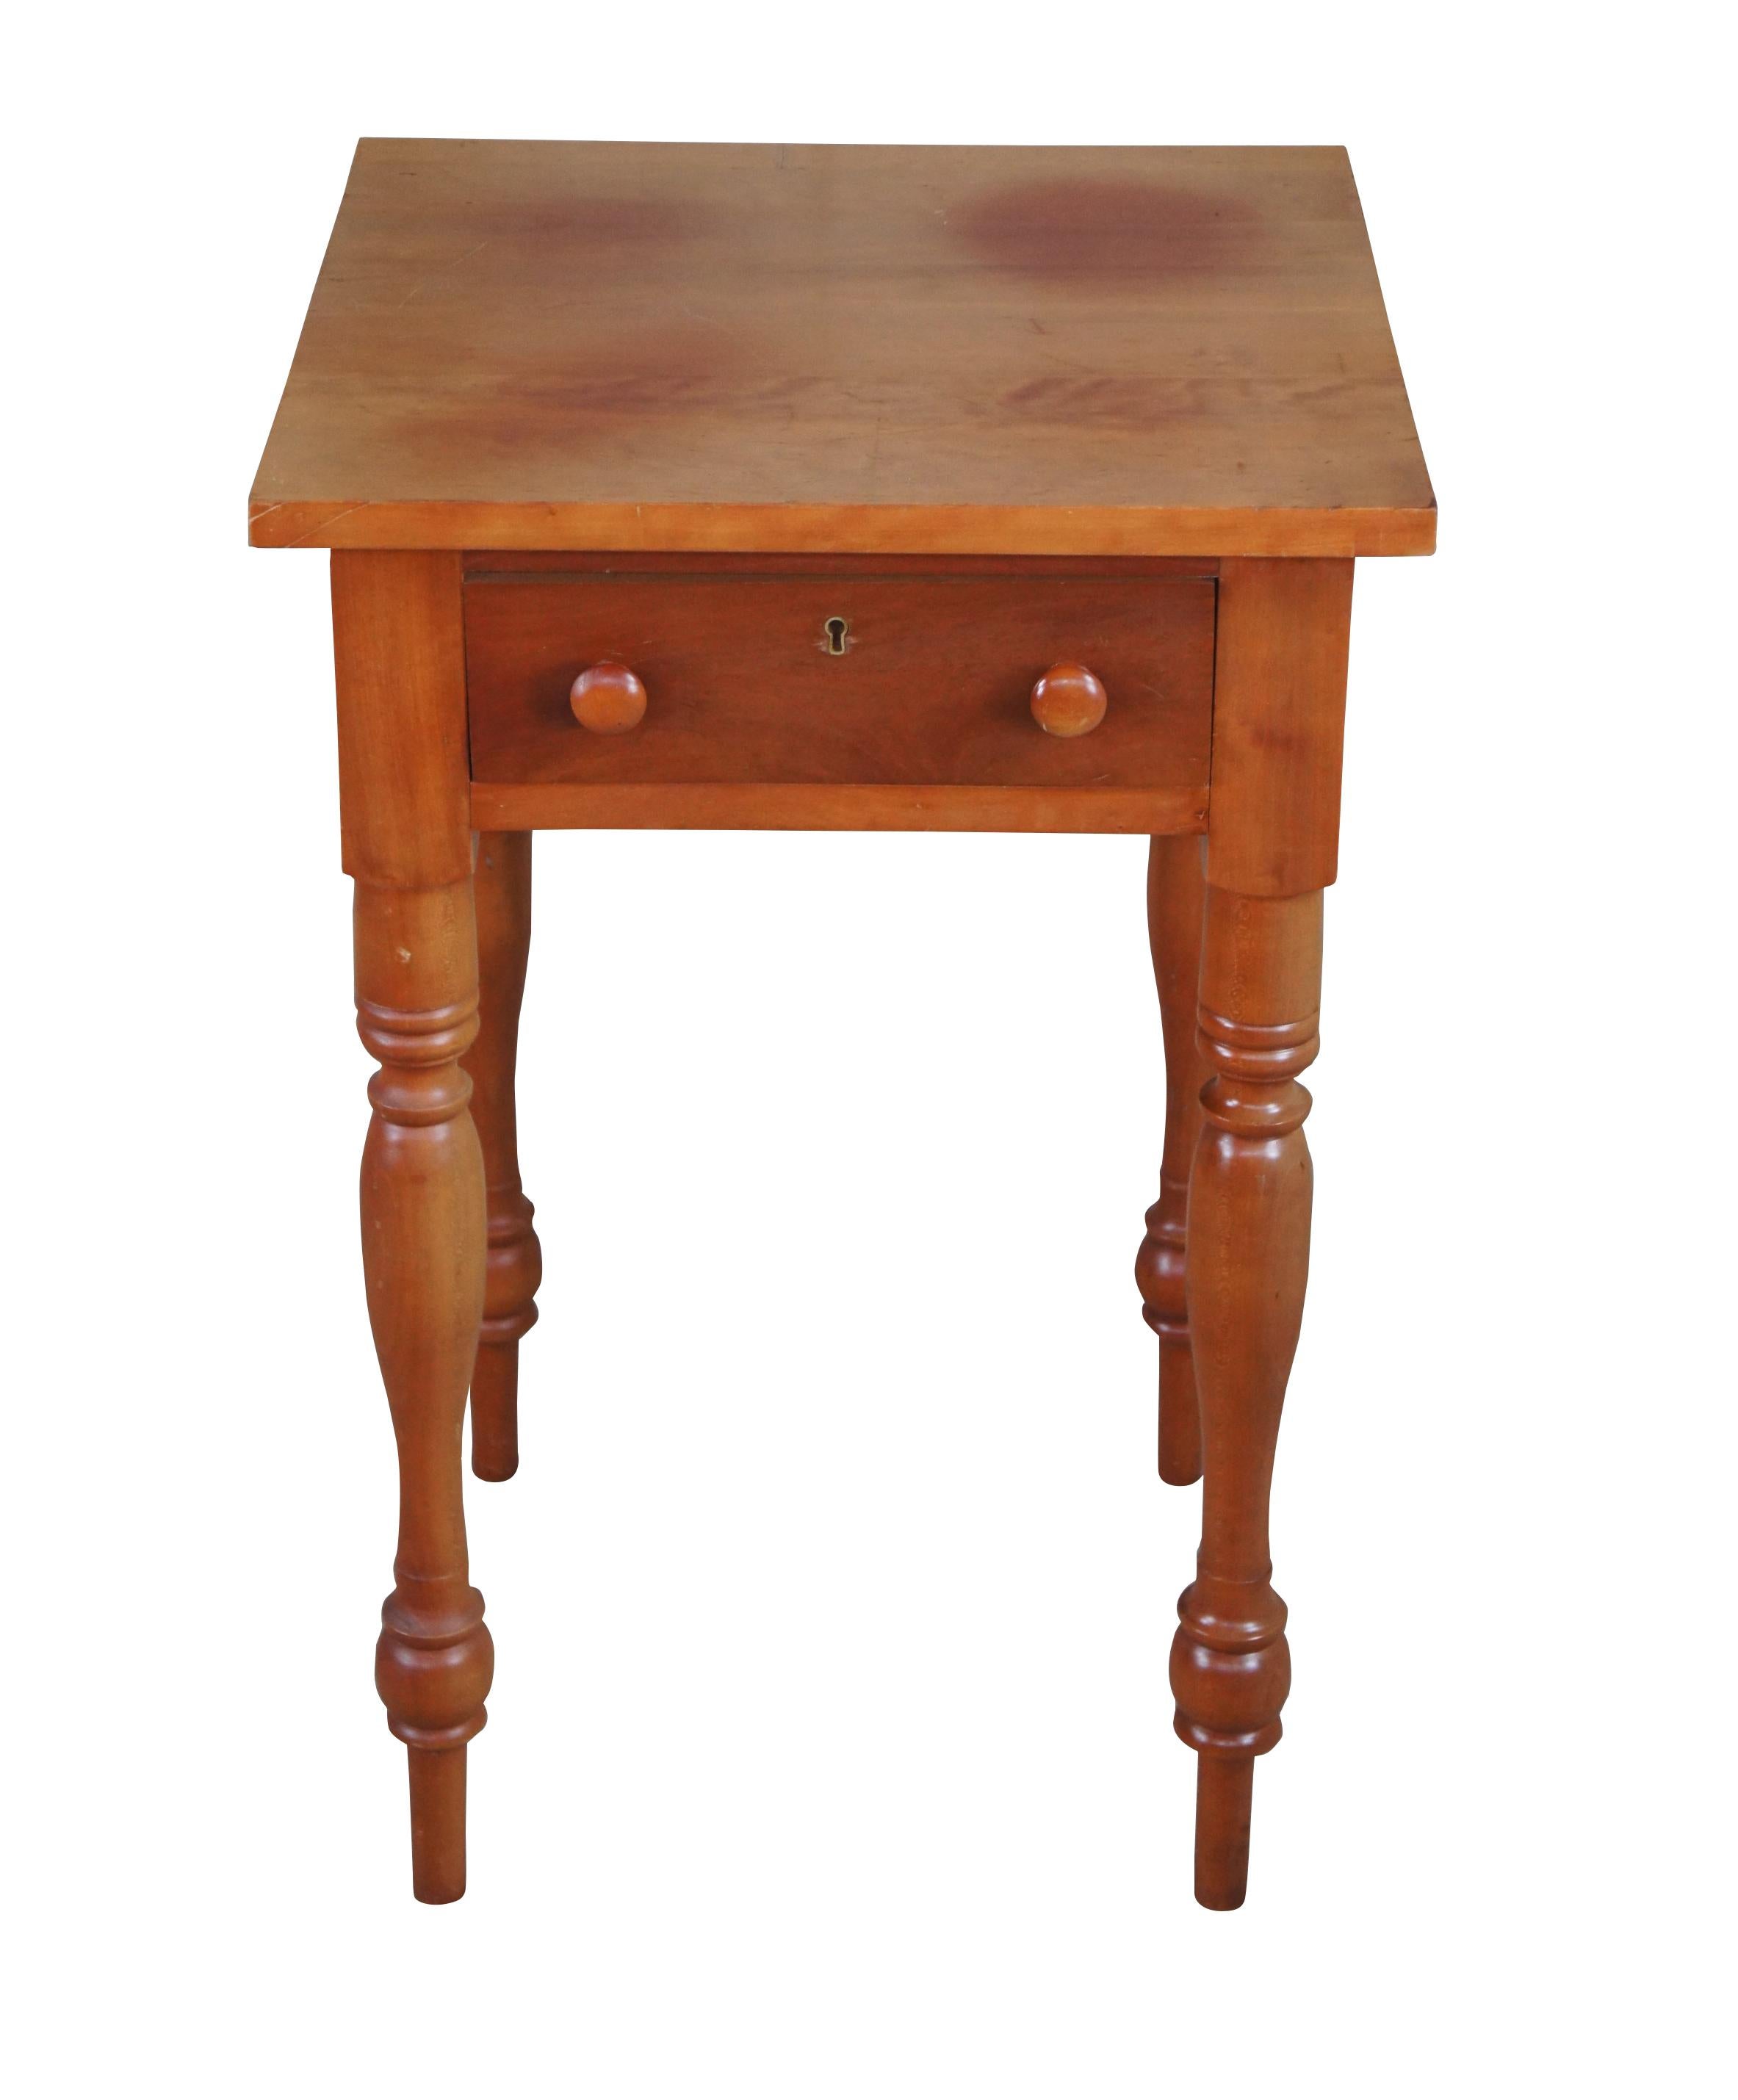 McMahan Furniture Co. Early American side table.  Made of cherry featuring rectangular form with one dovetailed drawer and turned legs.

CAMPBELLSVILLE, Ky. - Eugene McMahan & Son Furniture Co. was started by Eugene and his eight sons in the early